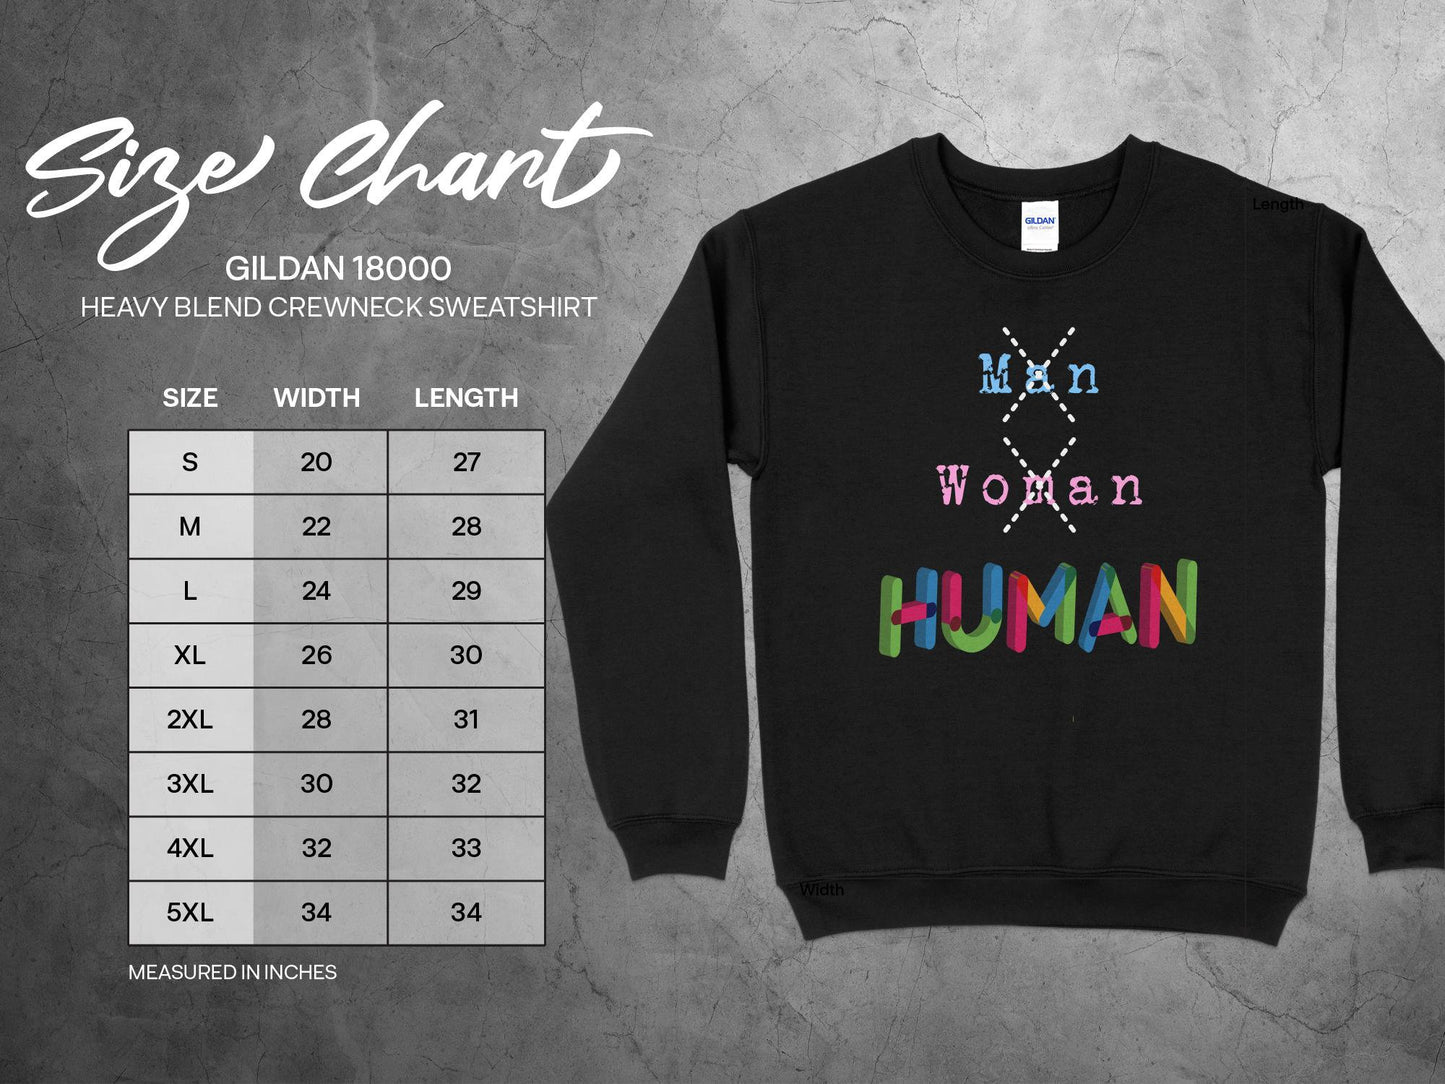 Human Equality T-Shirt - Celebrate Love, Equality, and Pride! Love Is Love shirt